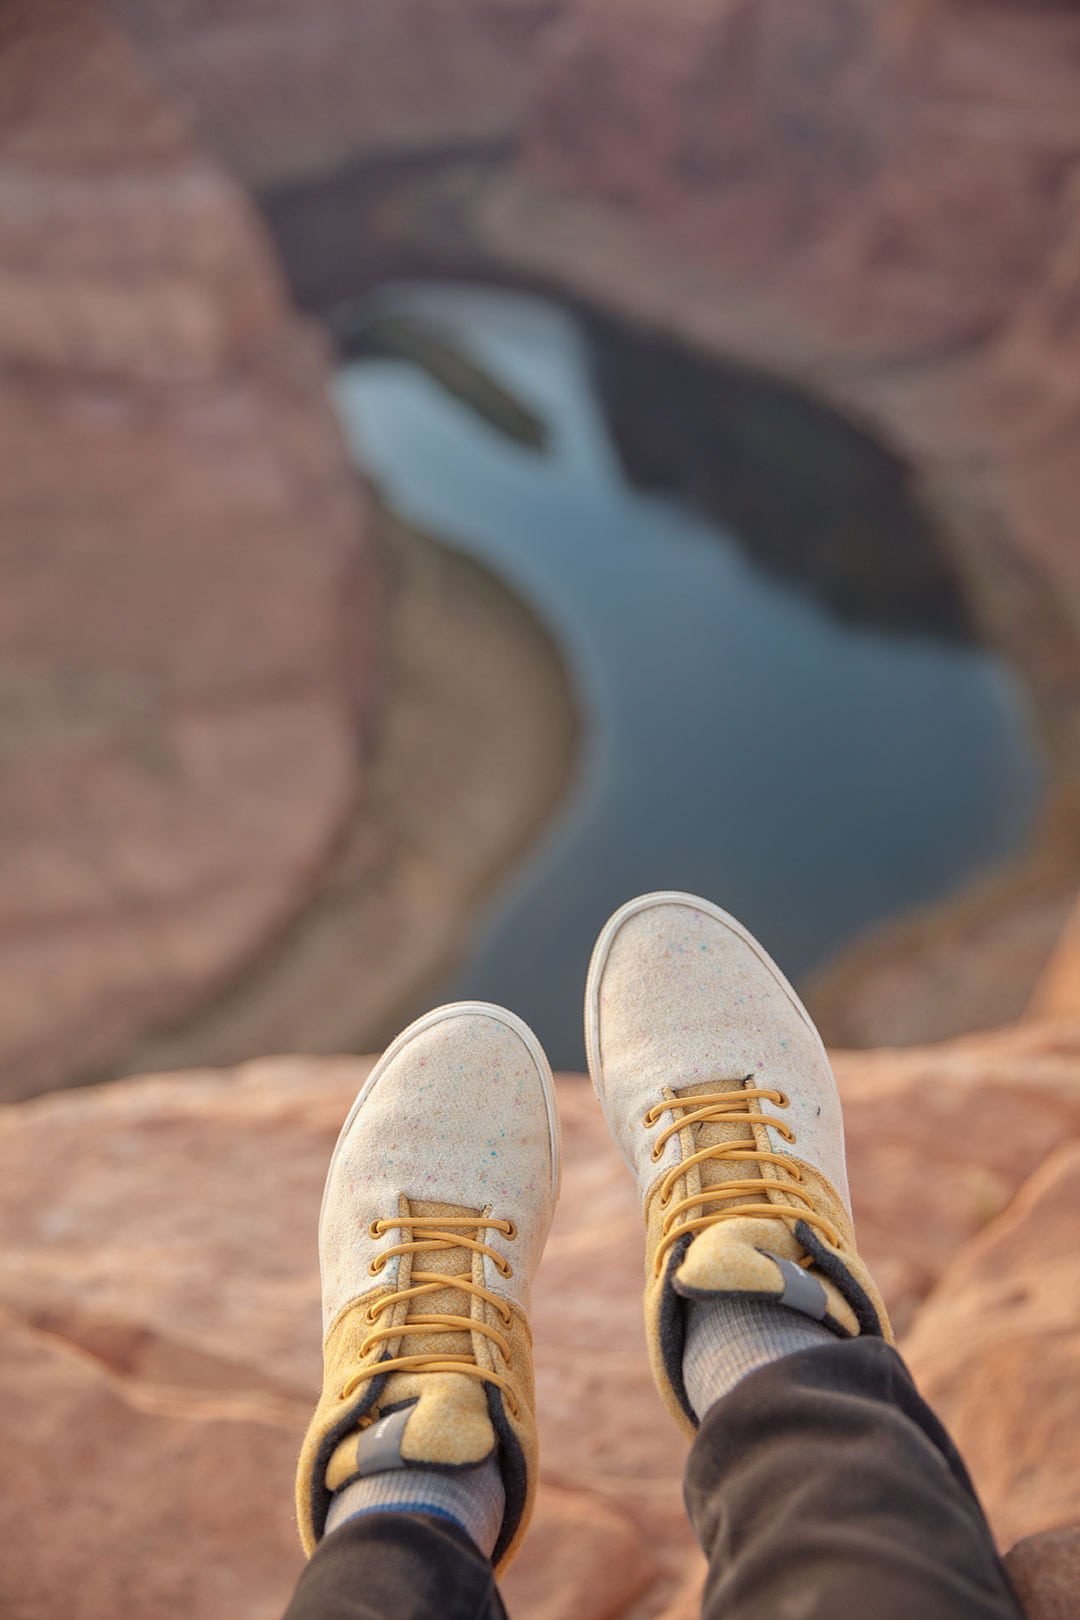 Baabuk Shoes + 15 Best Travel Shoes You Should Try in 2020